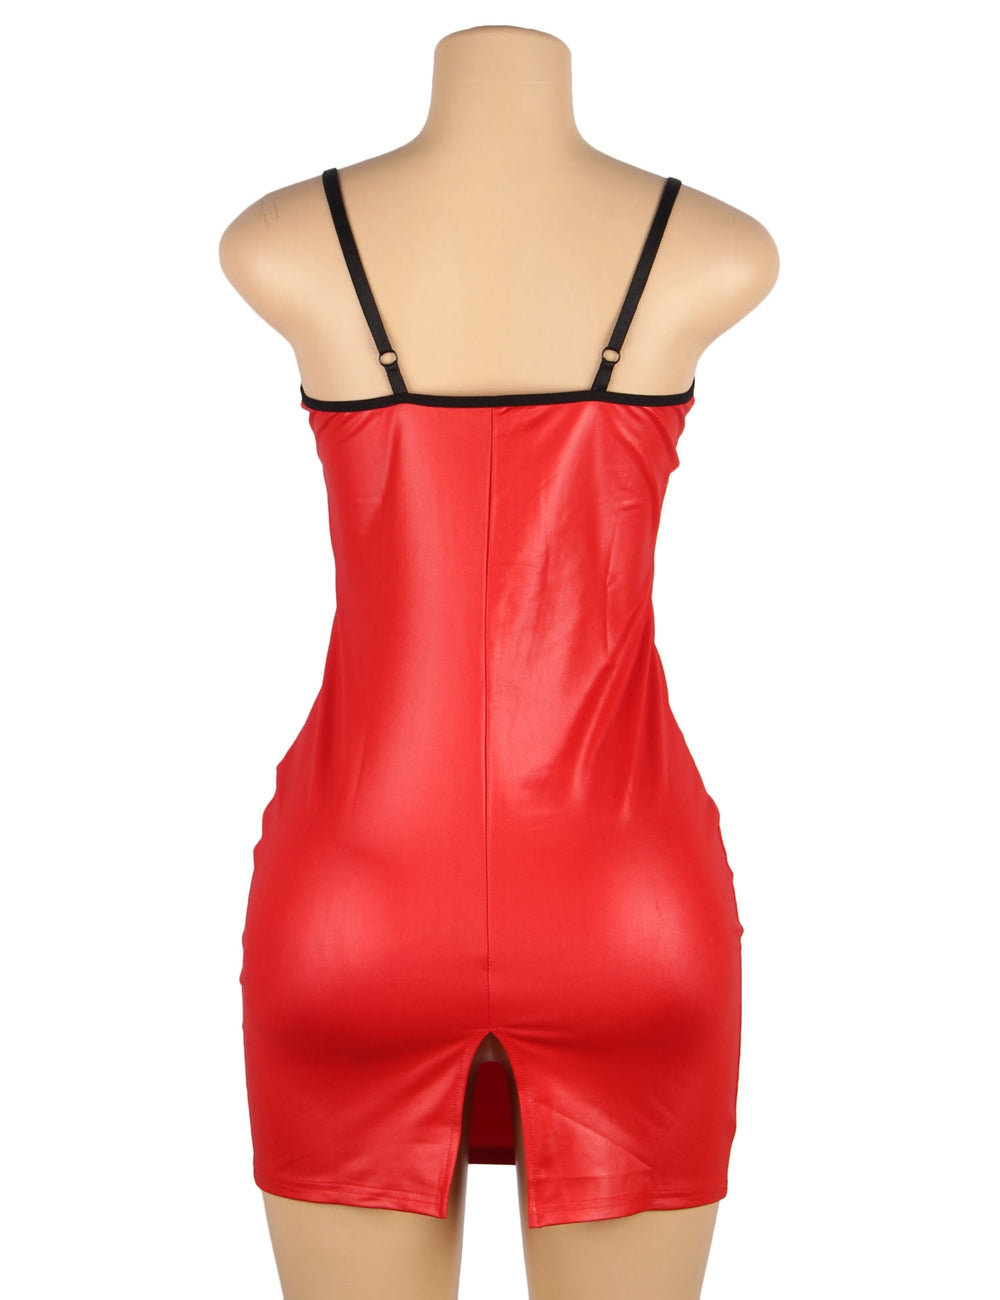 Red High Quality Sexy Design Leather Lingerie